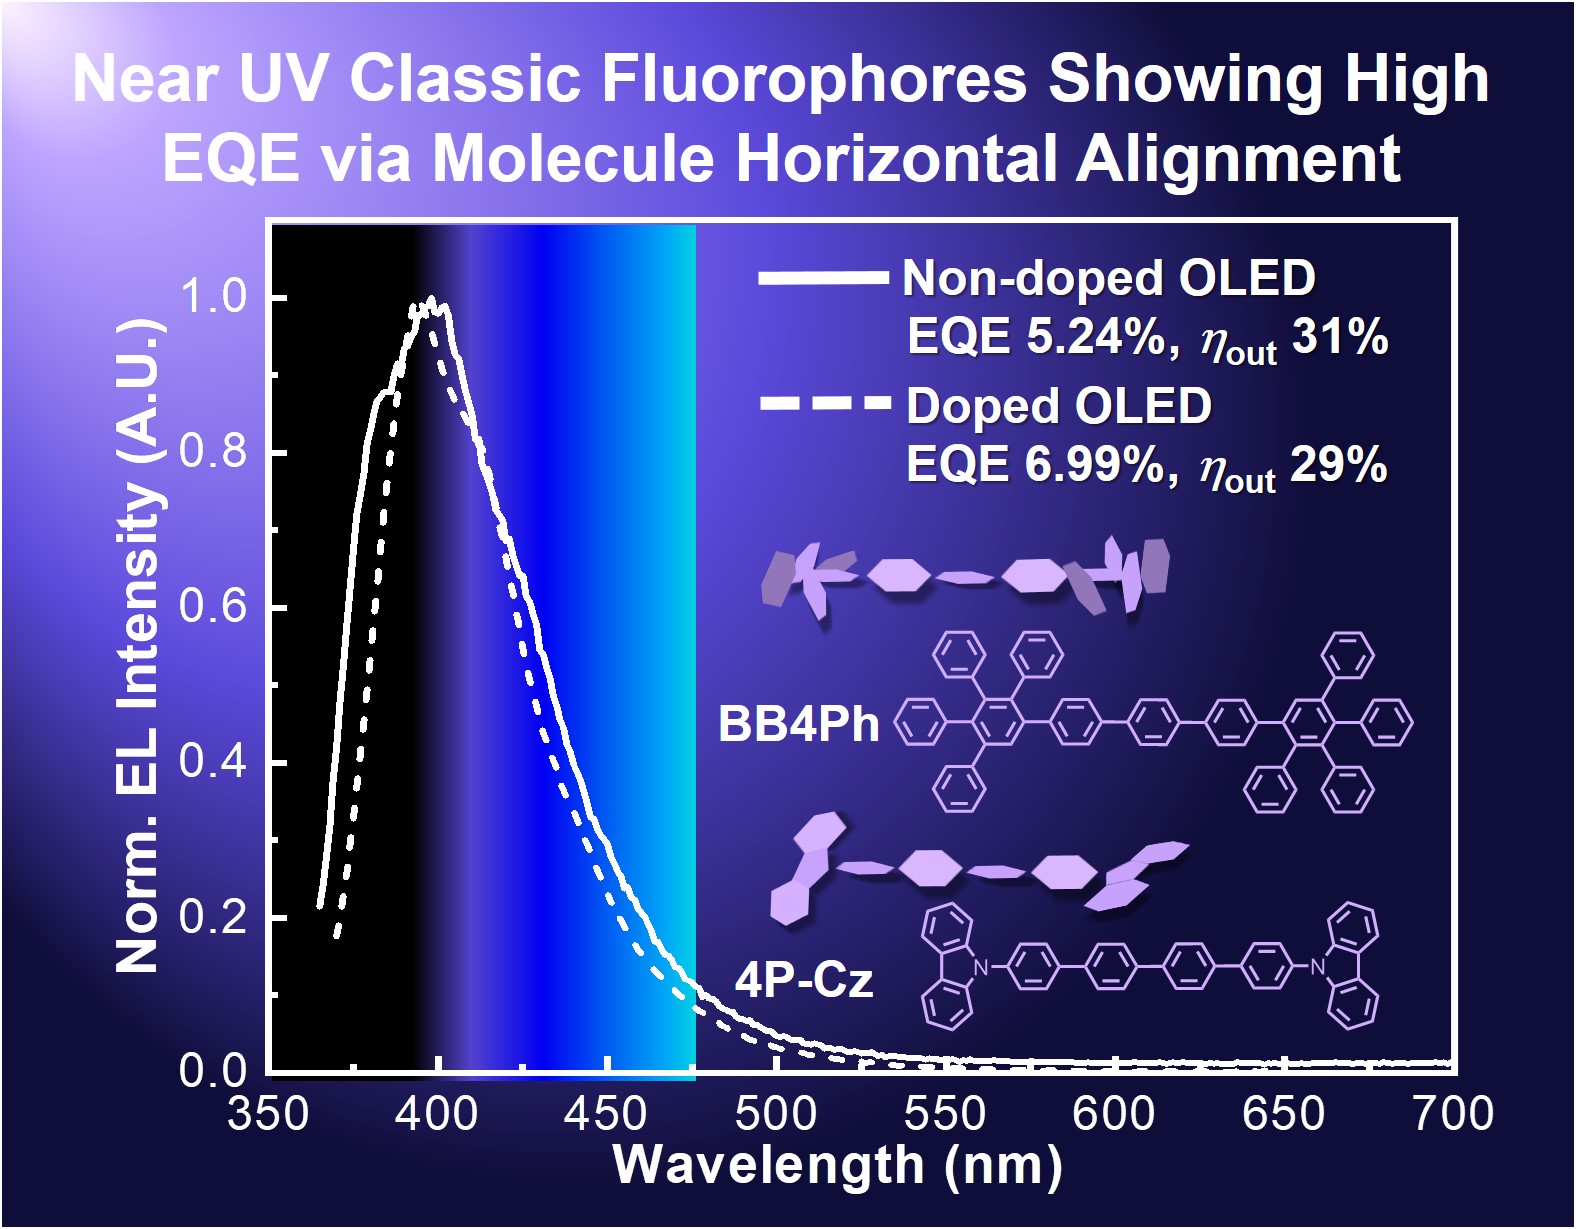 ear UV Classic Fluorophores Showing High